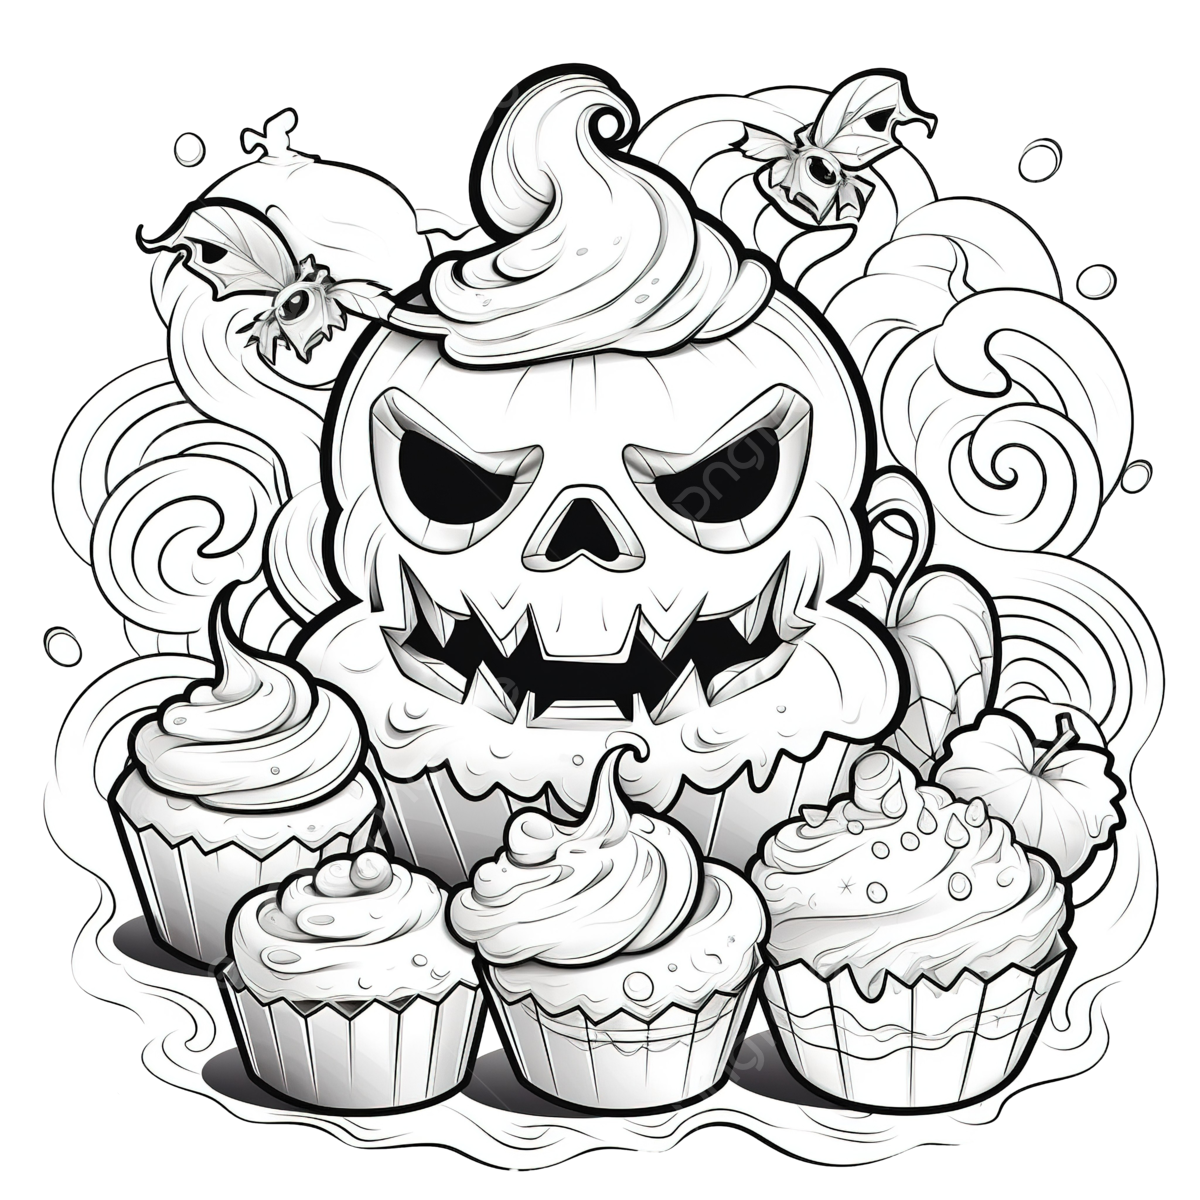 Halloween coloring page with sweet scary pastries sweets and pumpkin pumpkin drawing car drawing halloween drawing png transparent image and clipart for free download